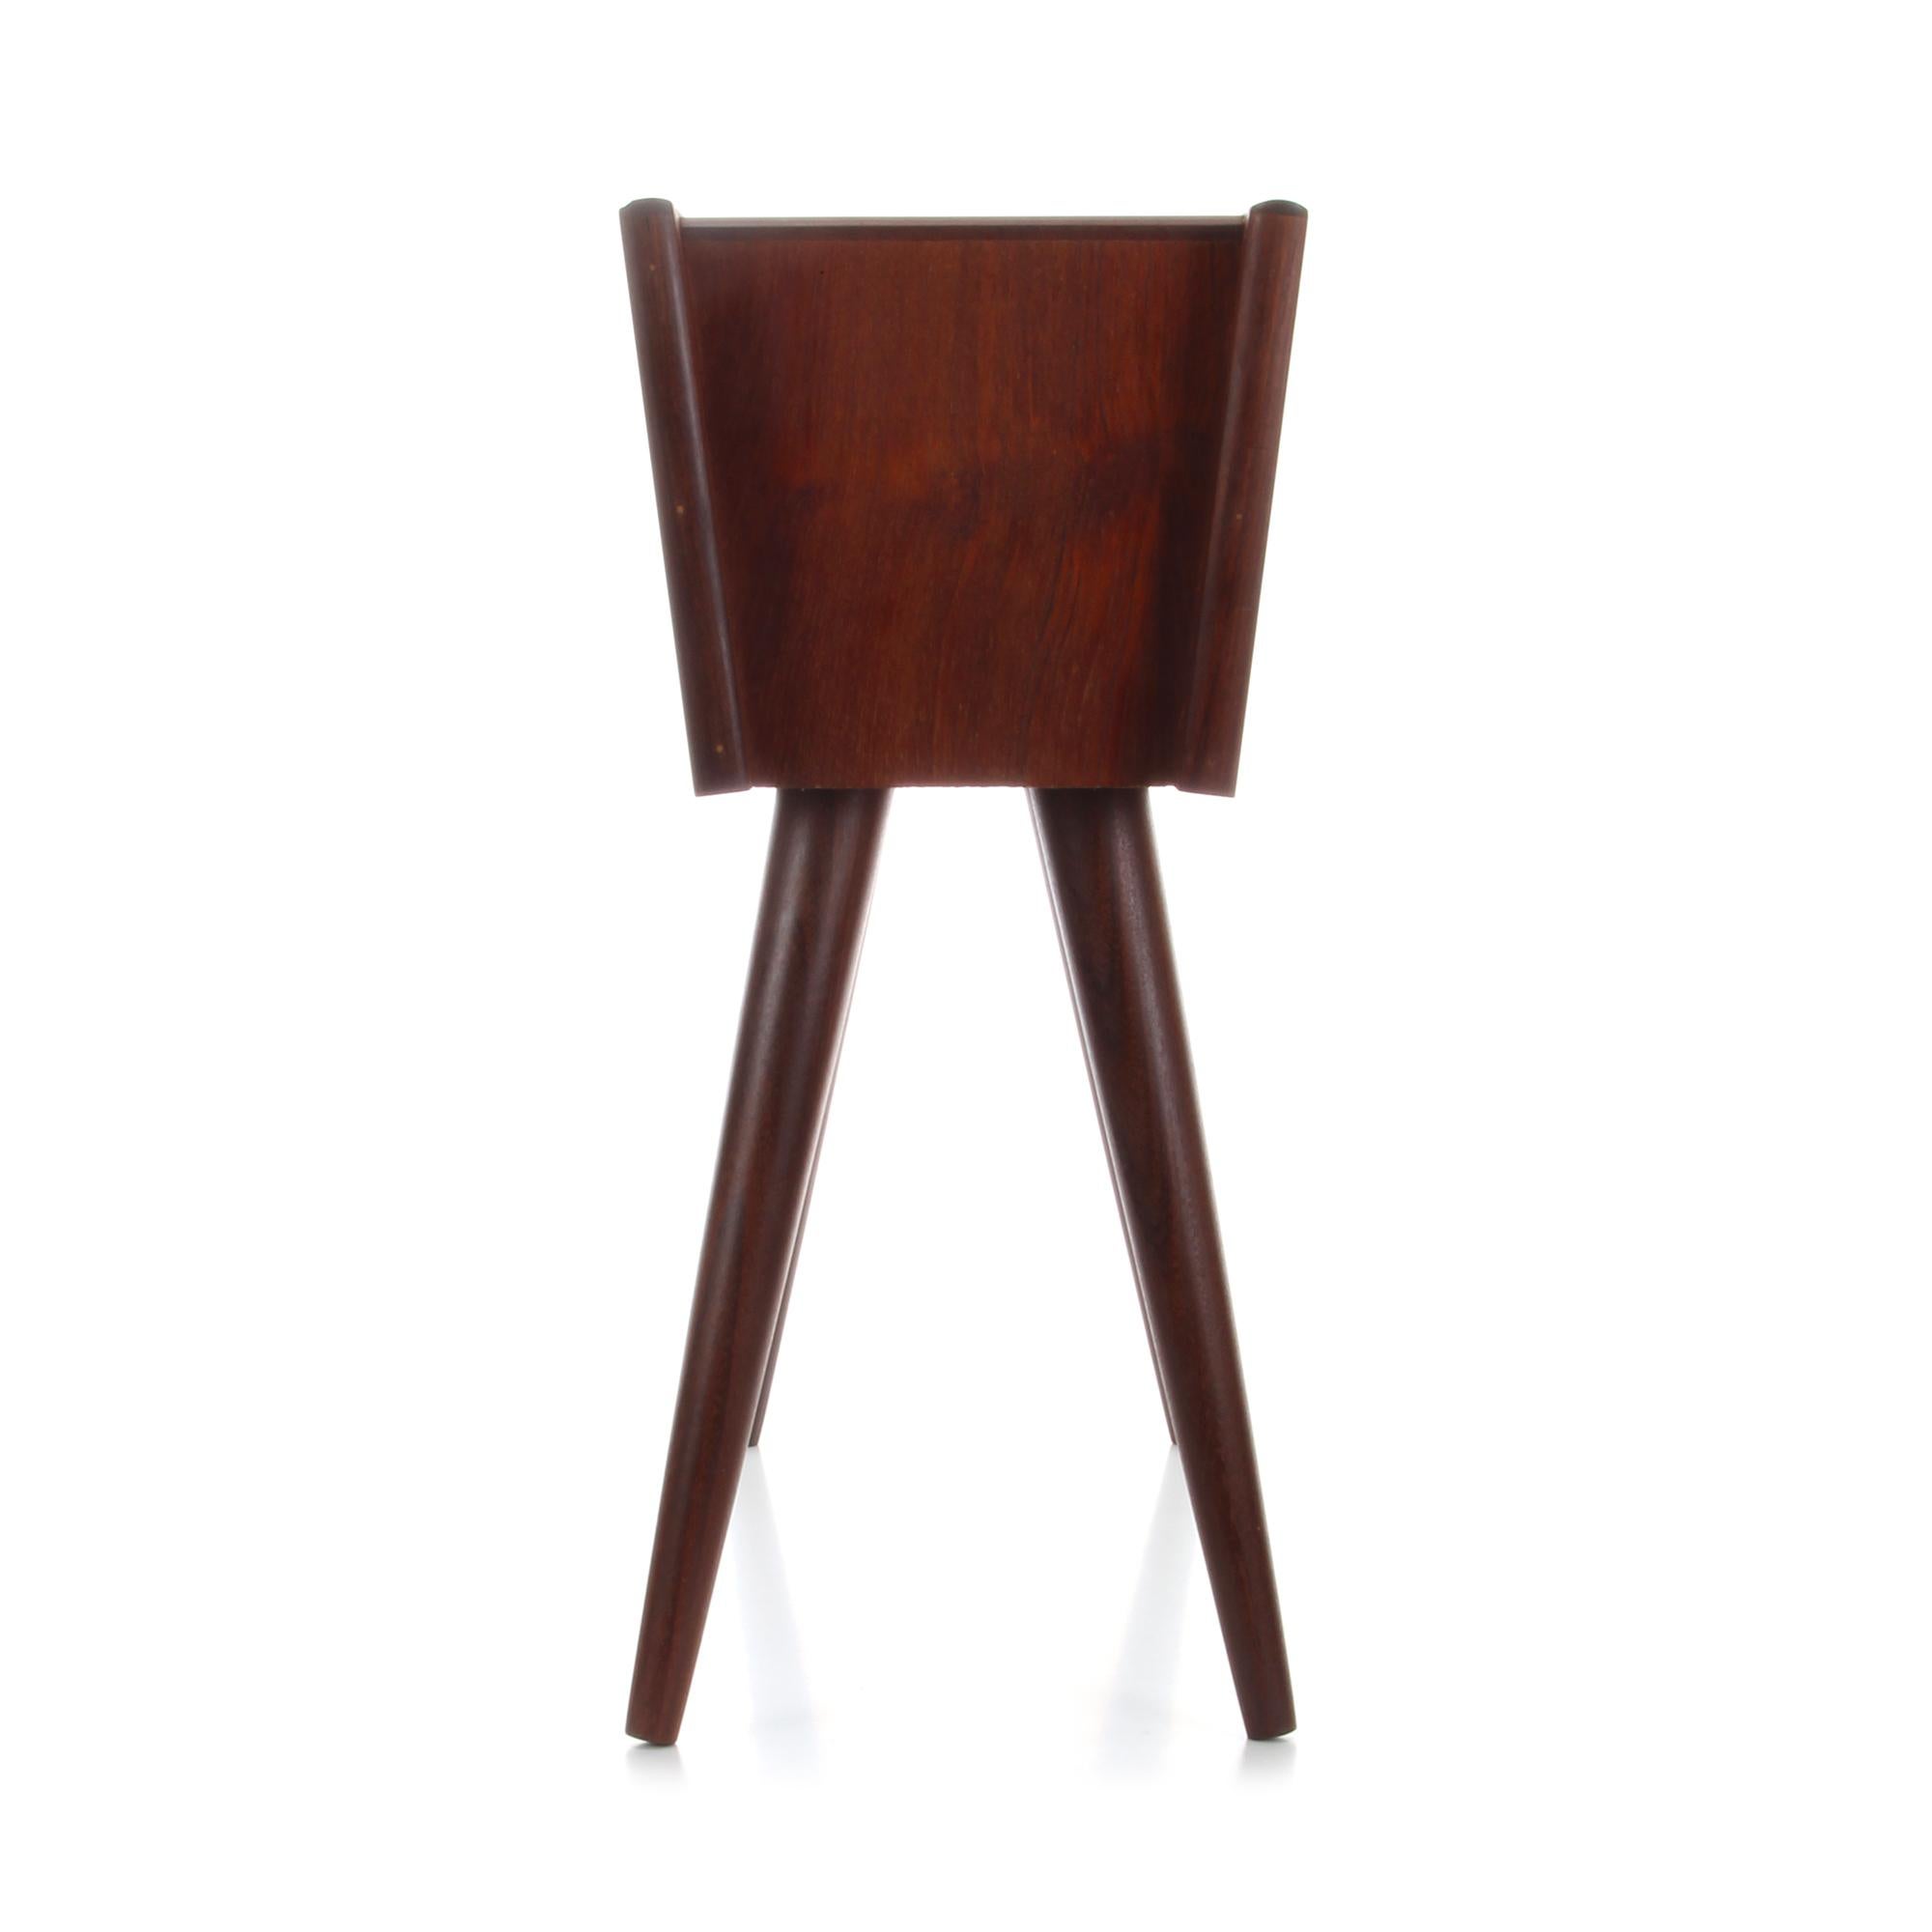 Teak Plant Stand 1960s, Danish Midcentury Plant Stand with Plastic Liner Pan In Good Condition In Brondby, Copenhagen